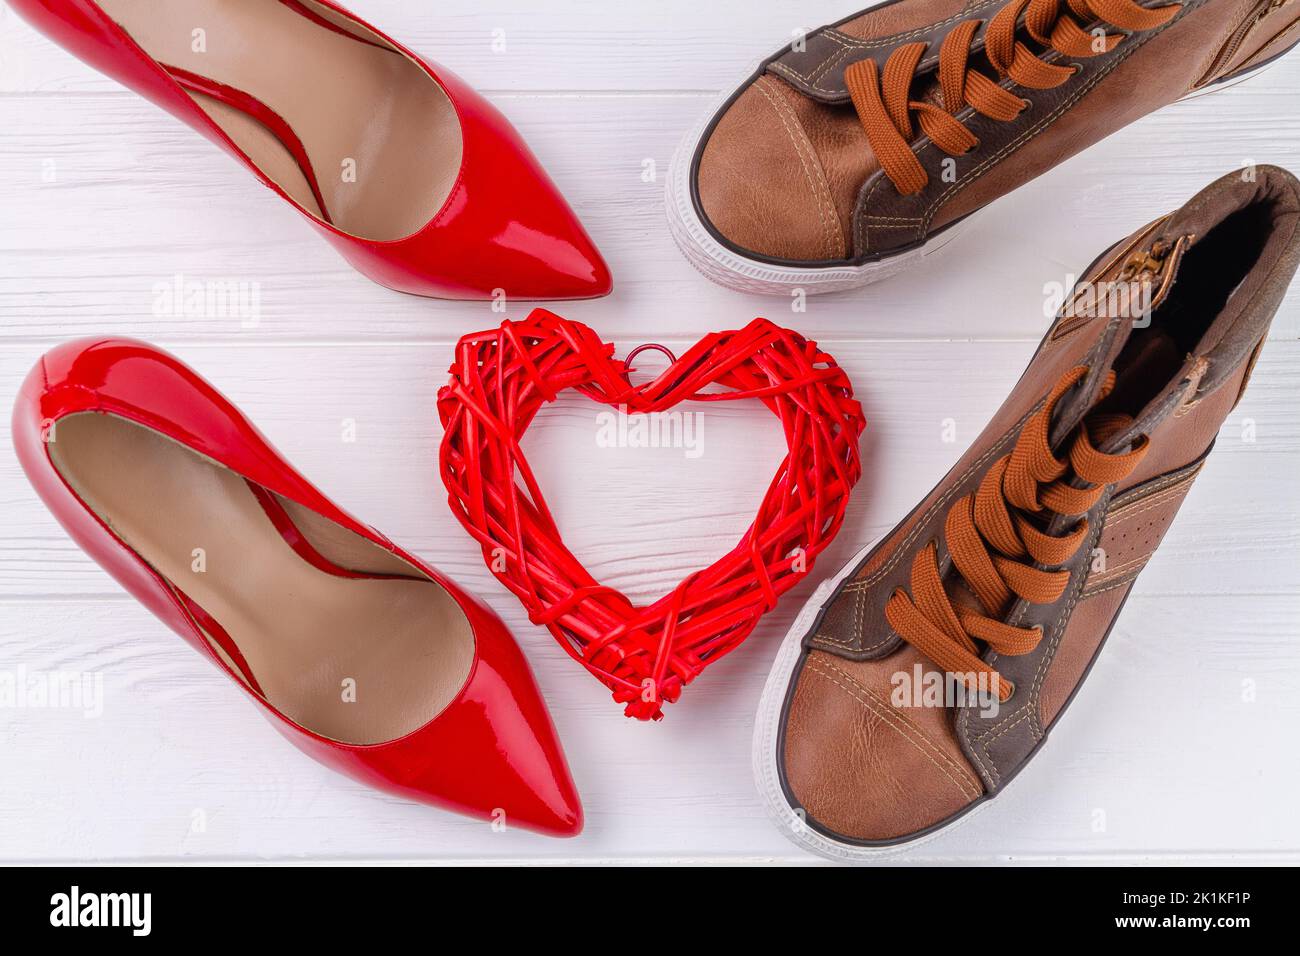 Top view of mens and womens shoes on white desk. Love or marriage concept. Stock Photo